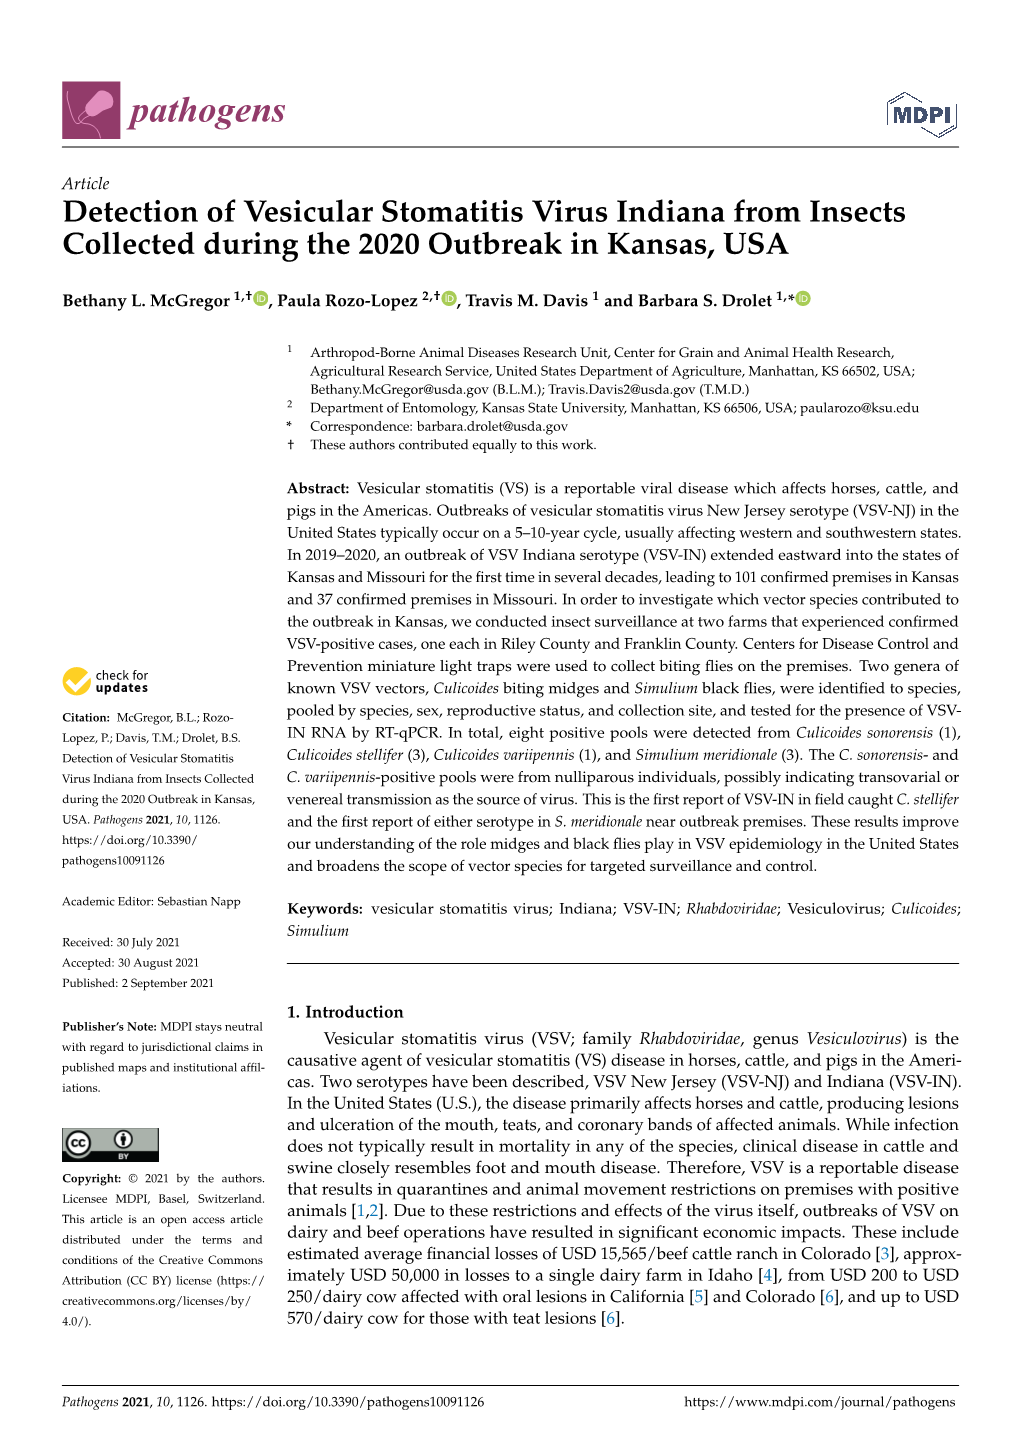 Detection of Vesicular Stomatitis Virus Indiana from Insects Collected During the 2020 Outbreak in Kansas, USA